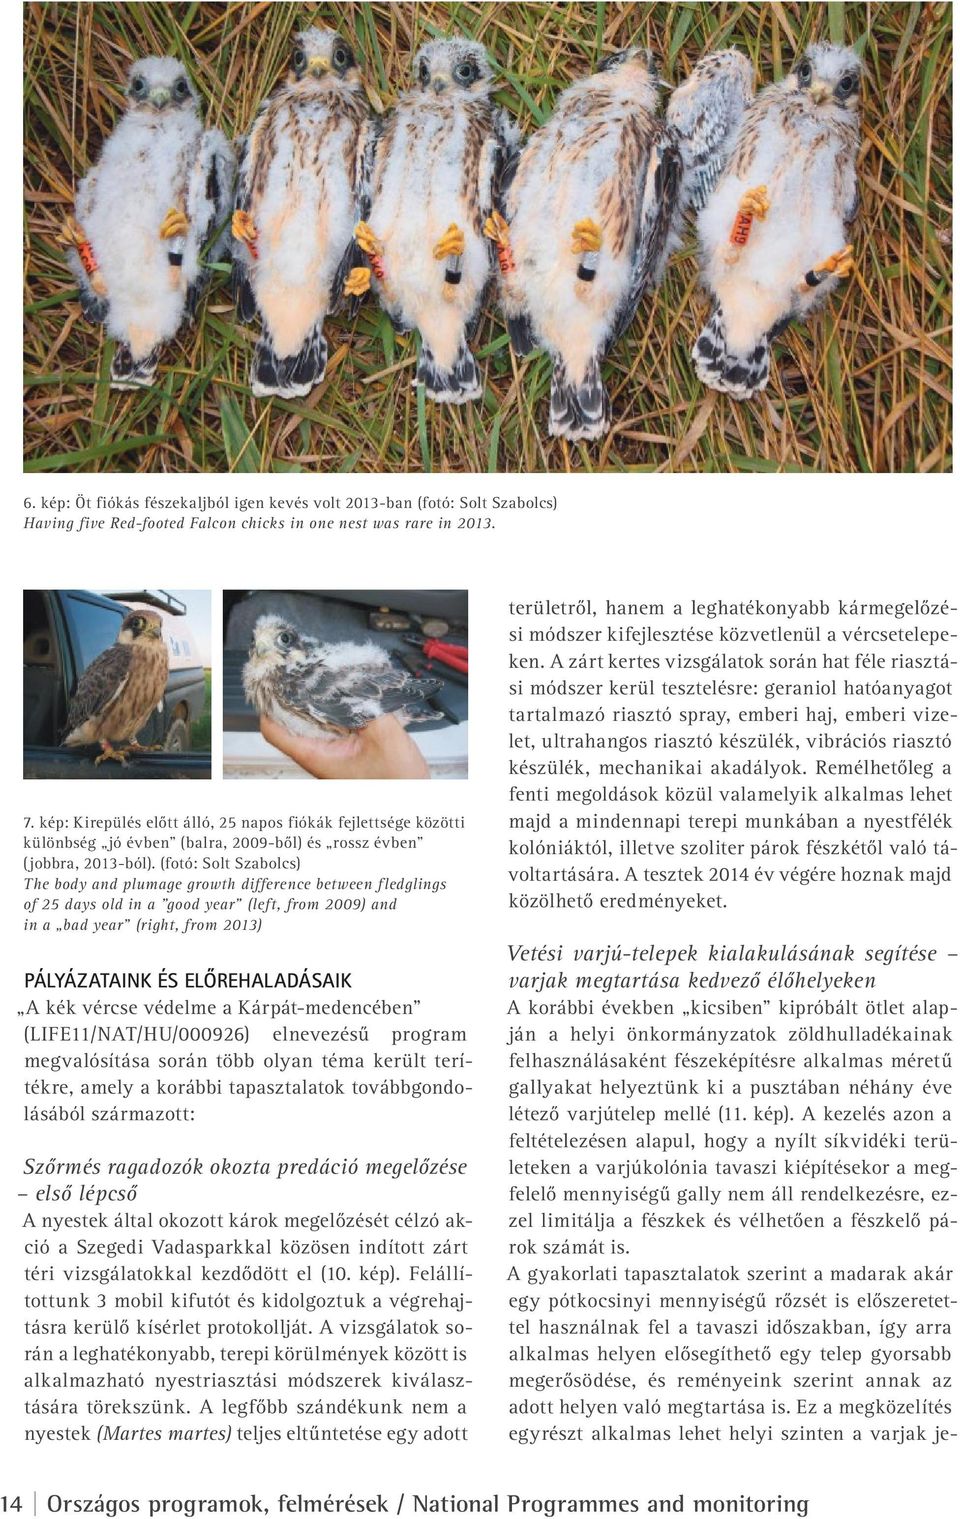 (fotó: Solt Szabolcs) The body and plumage growth difference between fledglings of 25 days old in a "good year (left, from 2009) and in a bad year (right, from 2013) Pályázataink és előrehaladásaik A